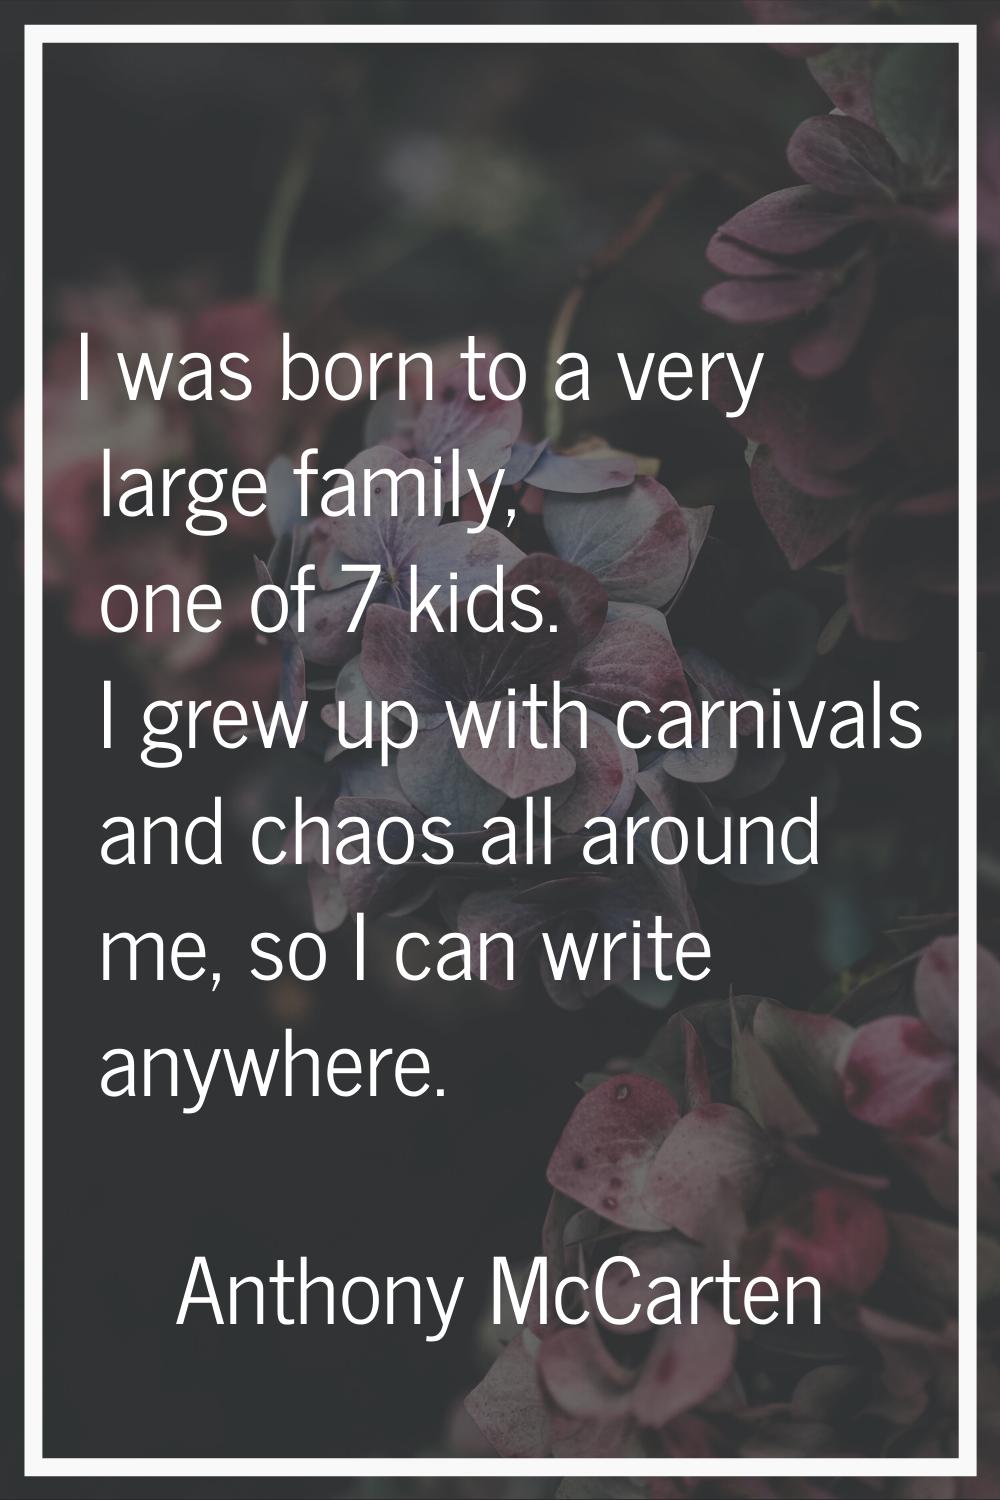 I was born to a very large family, one of 7 kids. I grew up with carnivals and chaos all around me,